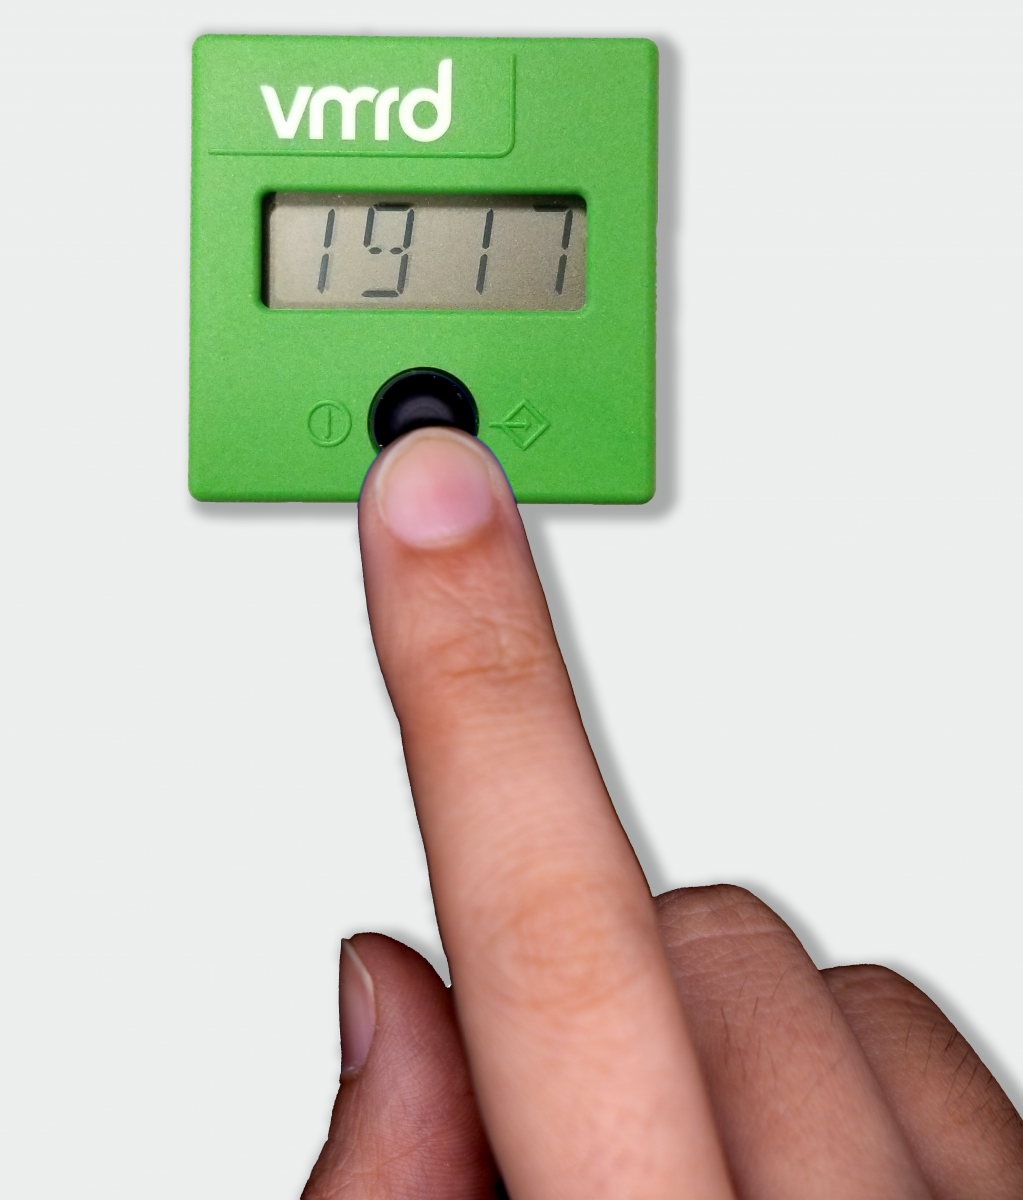 finger on button of VMRD reader showing numerical results 